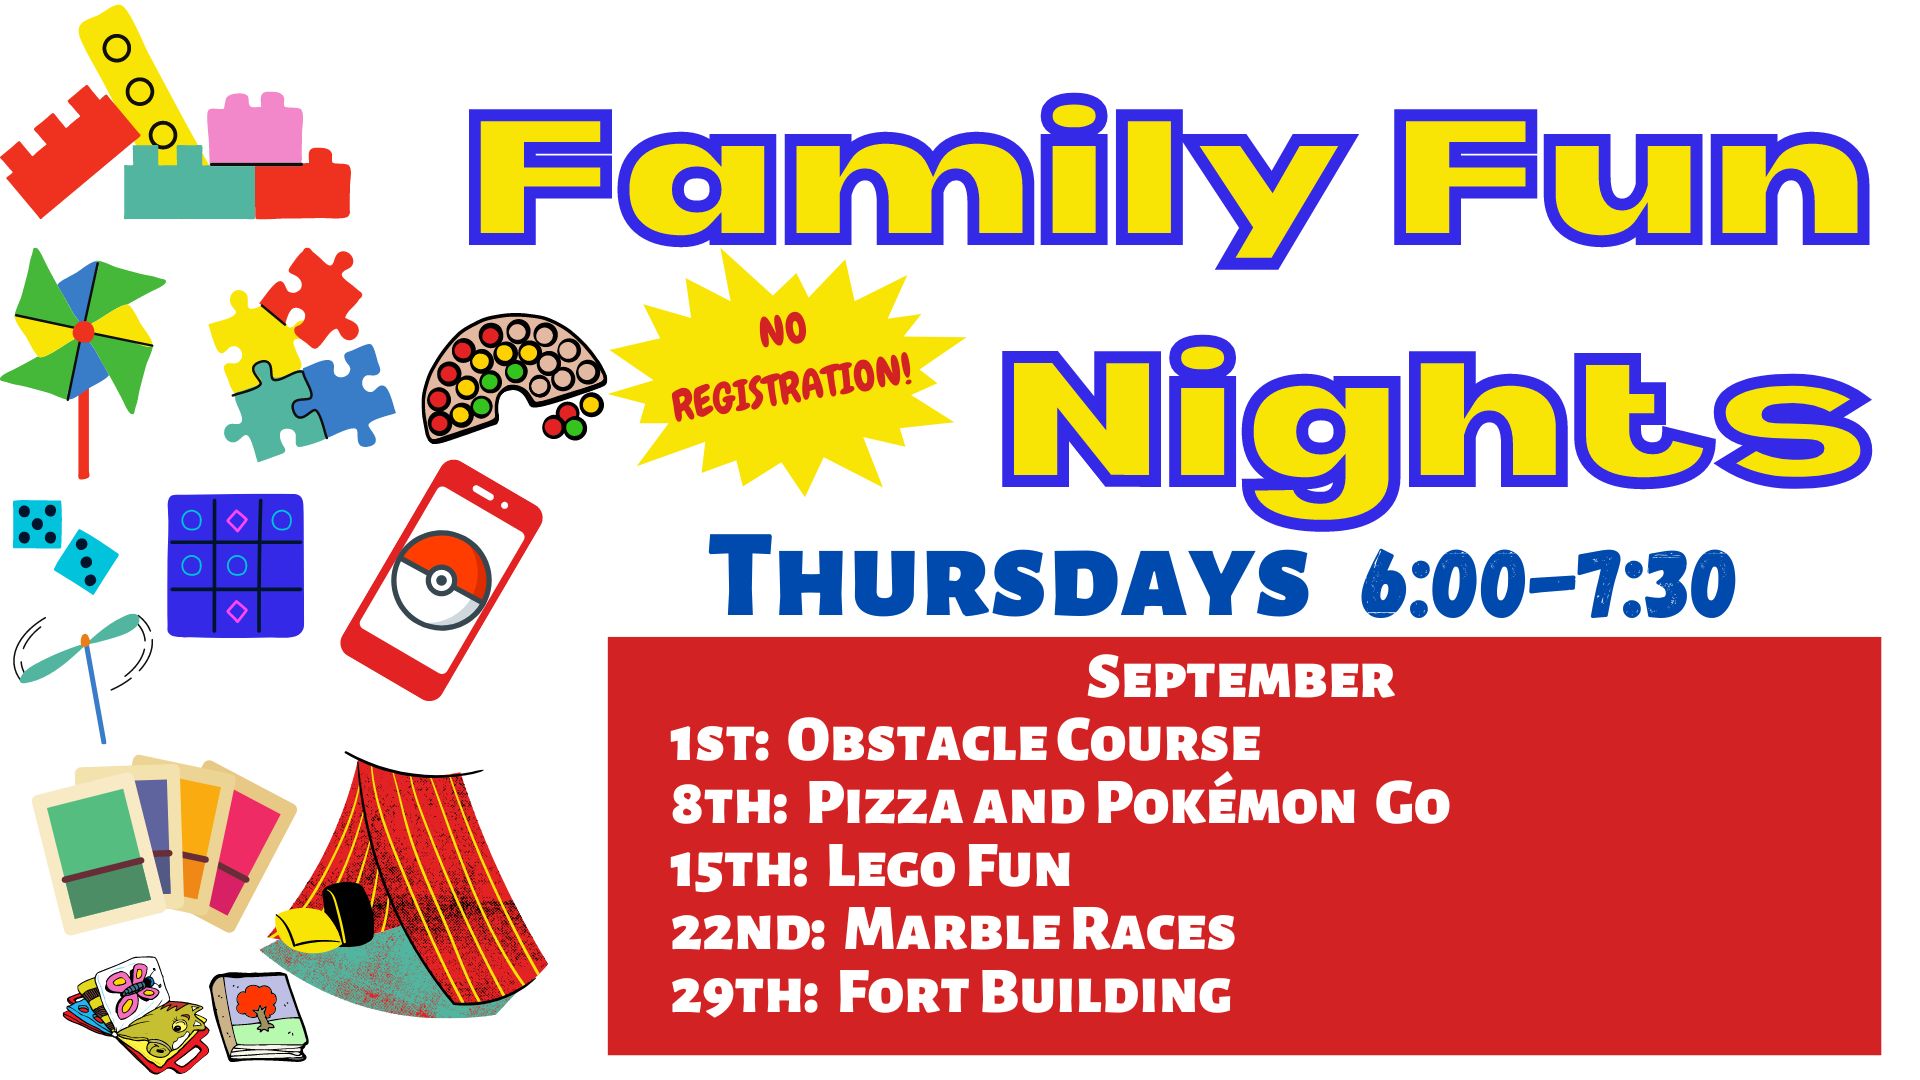 Picture graphics featuring LEGO, board games, and books.  Text reads: Family Fun Night. No registration. Thrusdays 6:00pm - 7:30 pm.  September 1st: Obstacle Course, 8th: Pizza and Pokemon Go, 15th: LEGO fun, 22nd: Marble Races, and 29th: Fort Building.